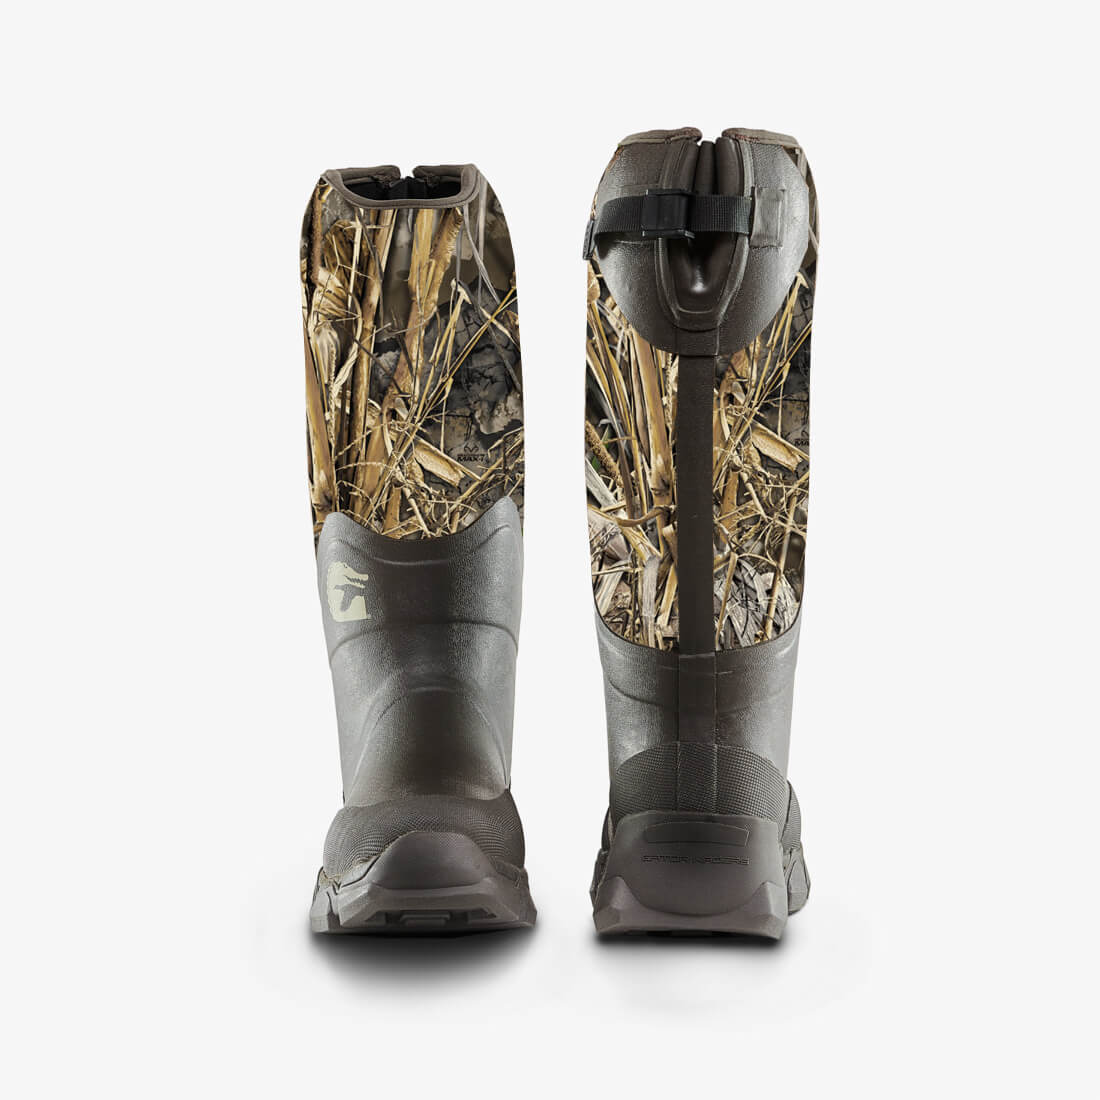 Omega Insulated Boots | Mens - Realtree Max-7 by Gator Waders